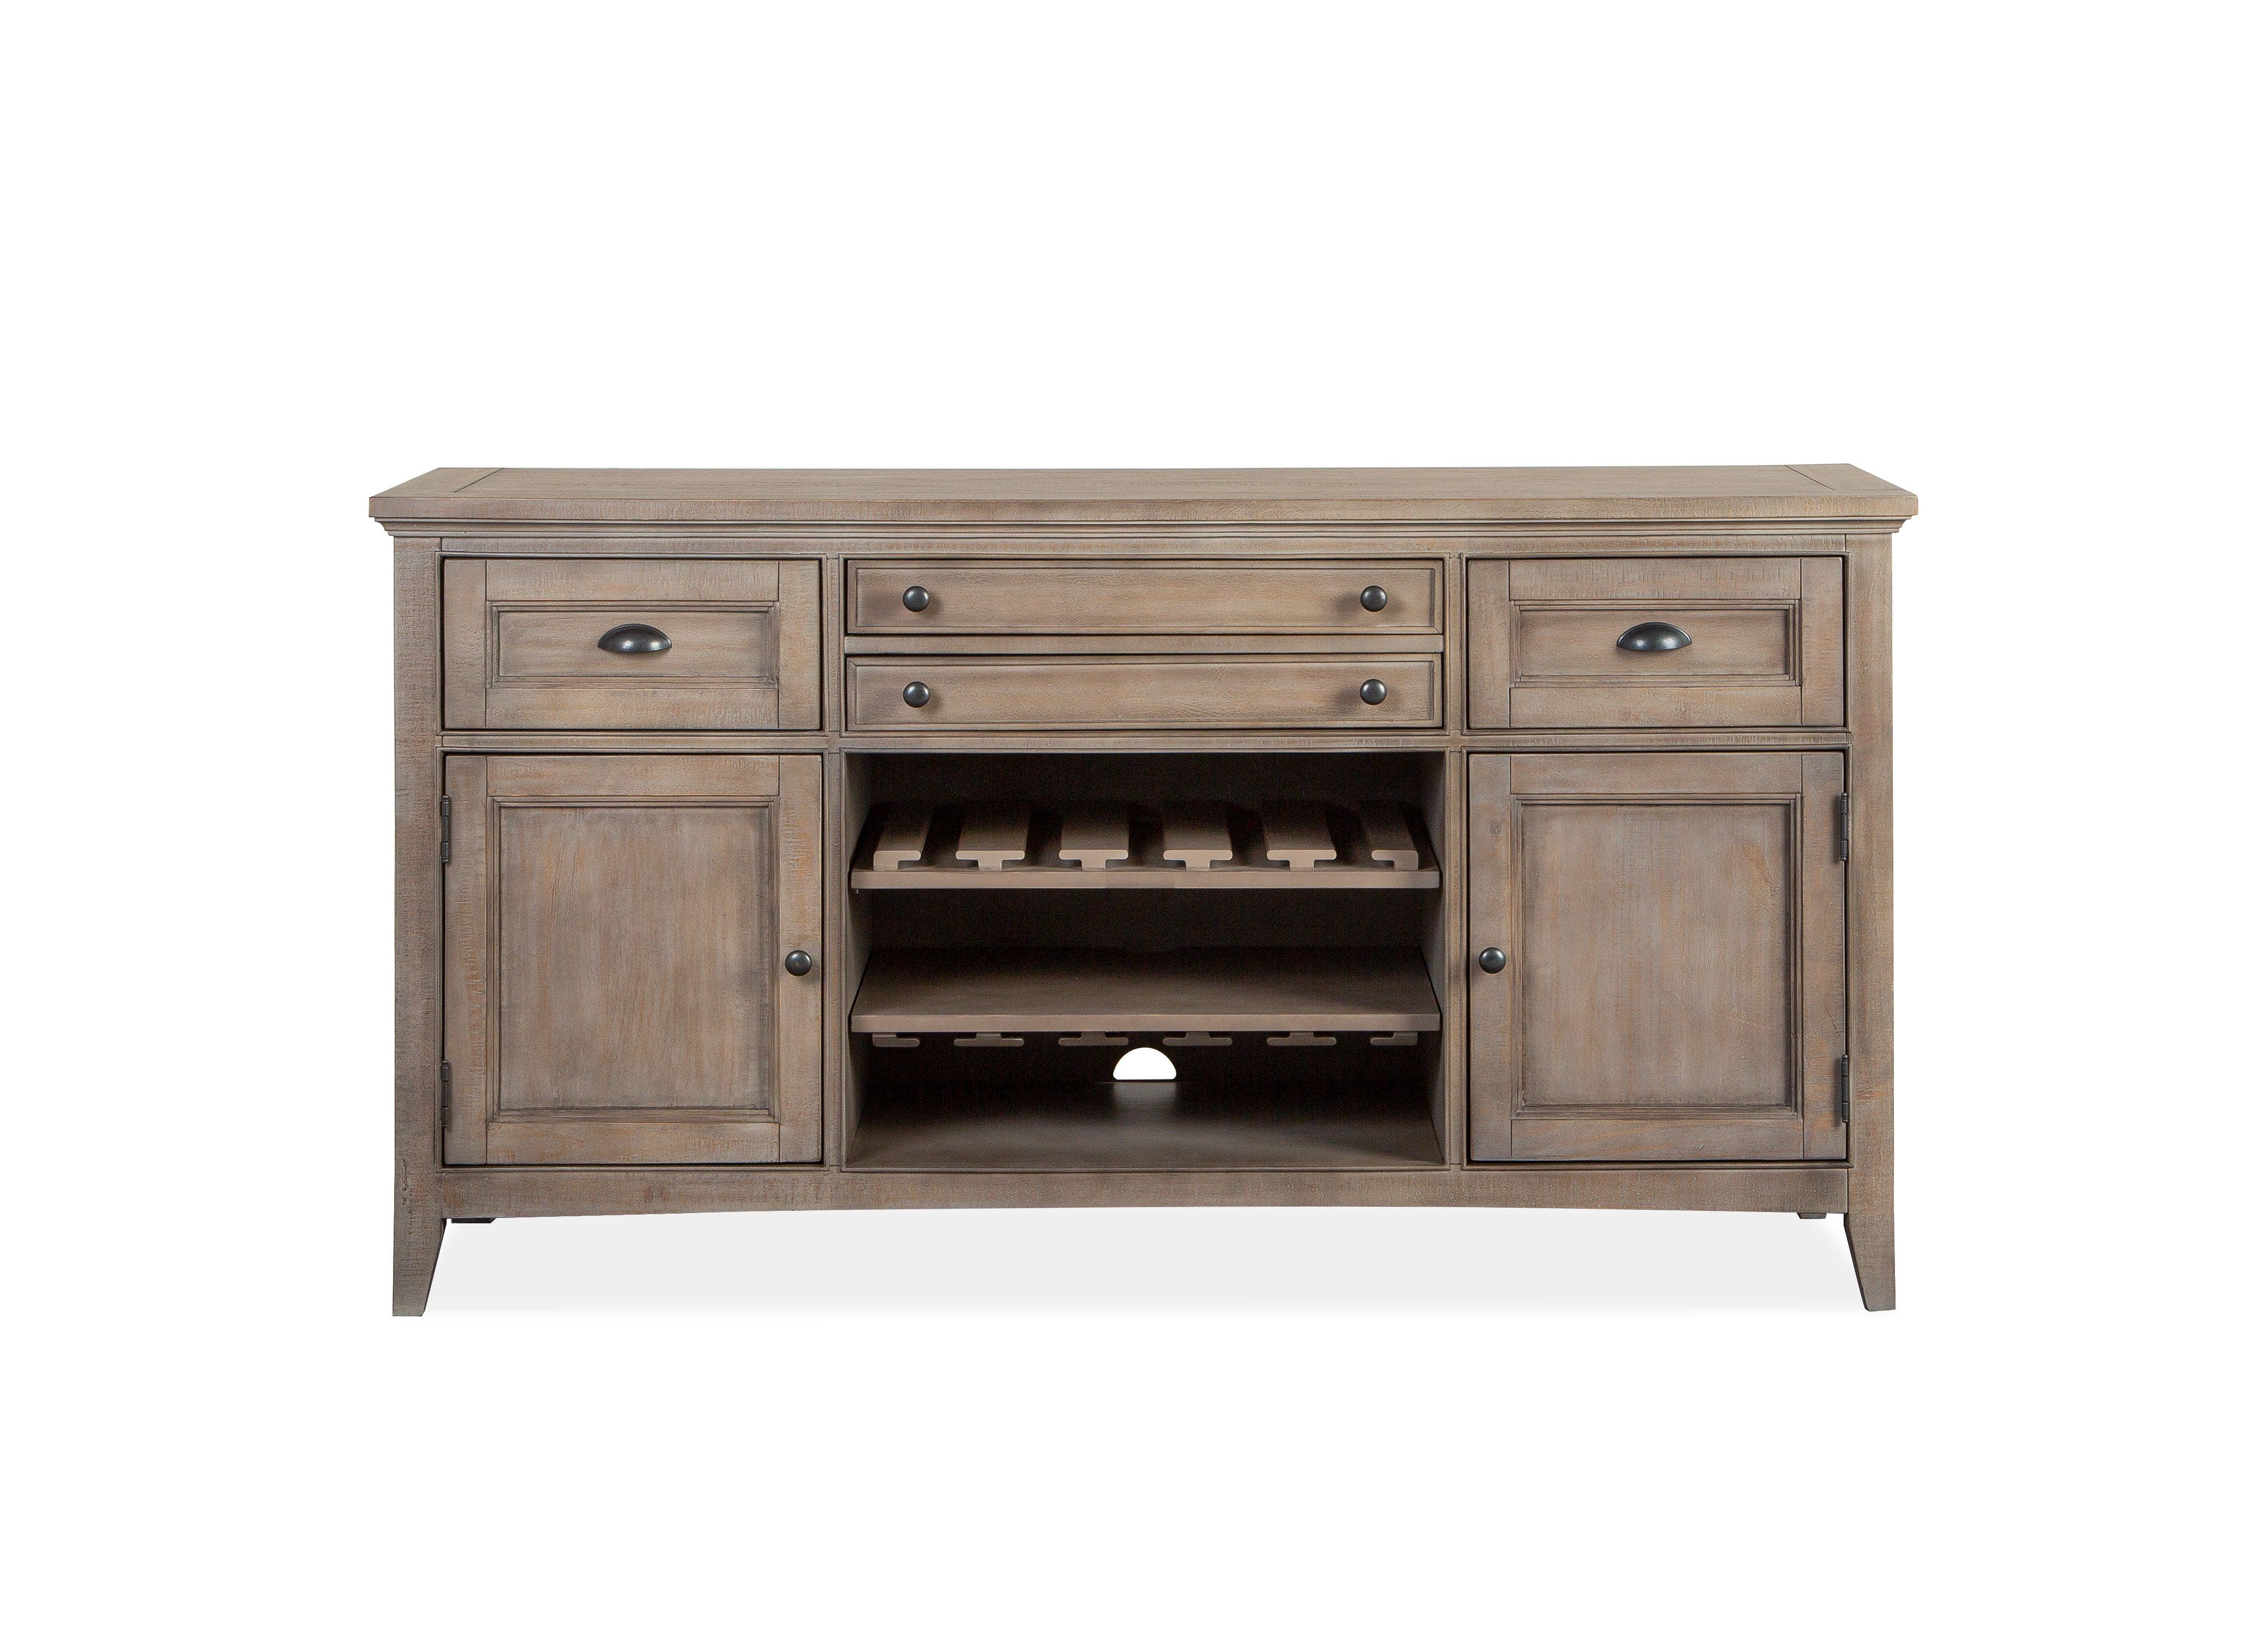 Magnussen Furniture - Paxton Place - Buffet - Dovetail Grey - 5th Avenue Furniture